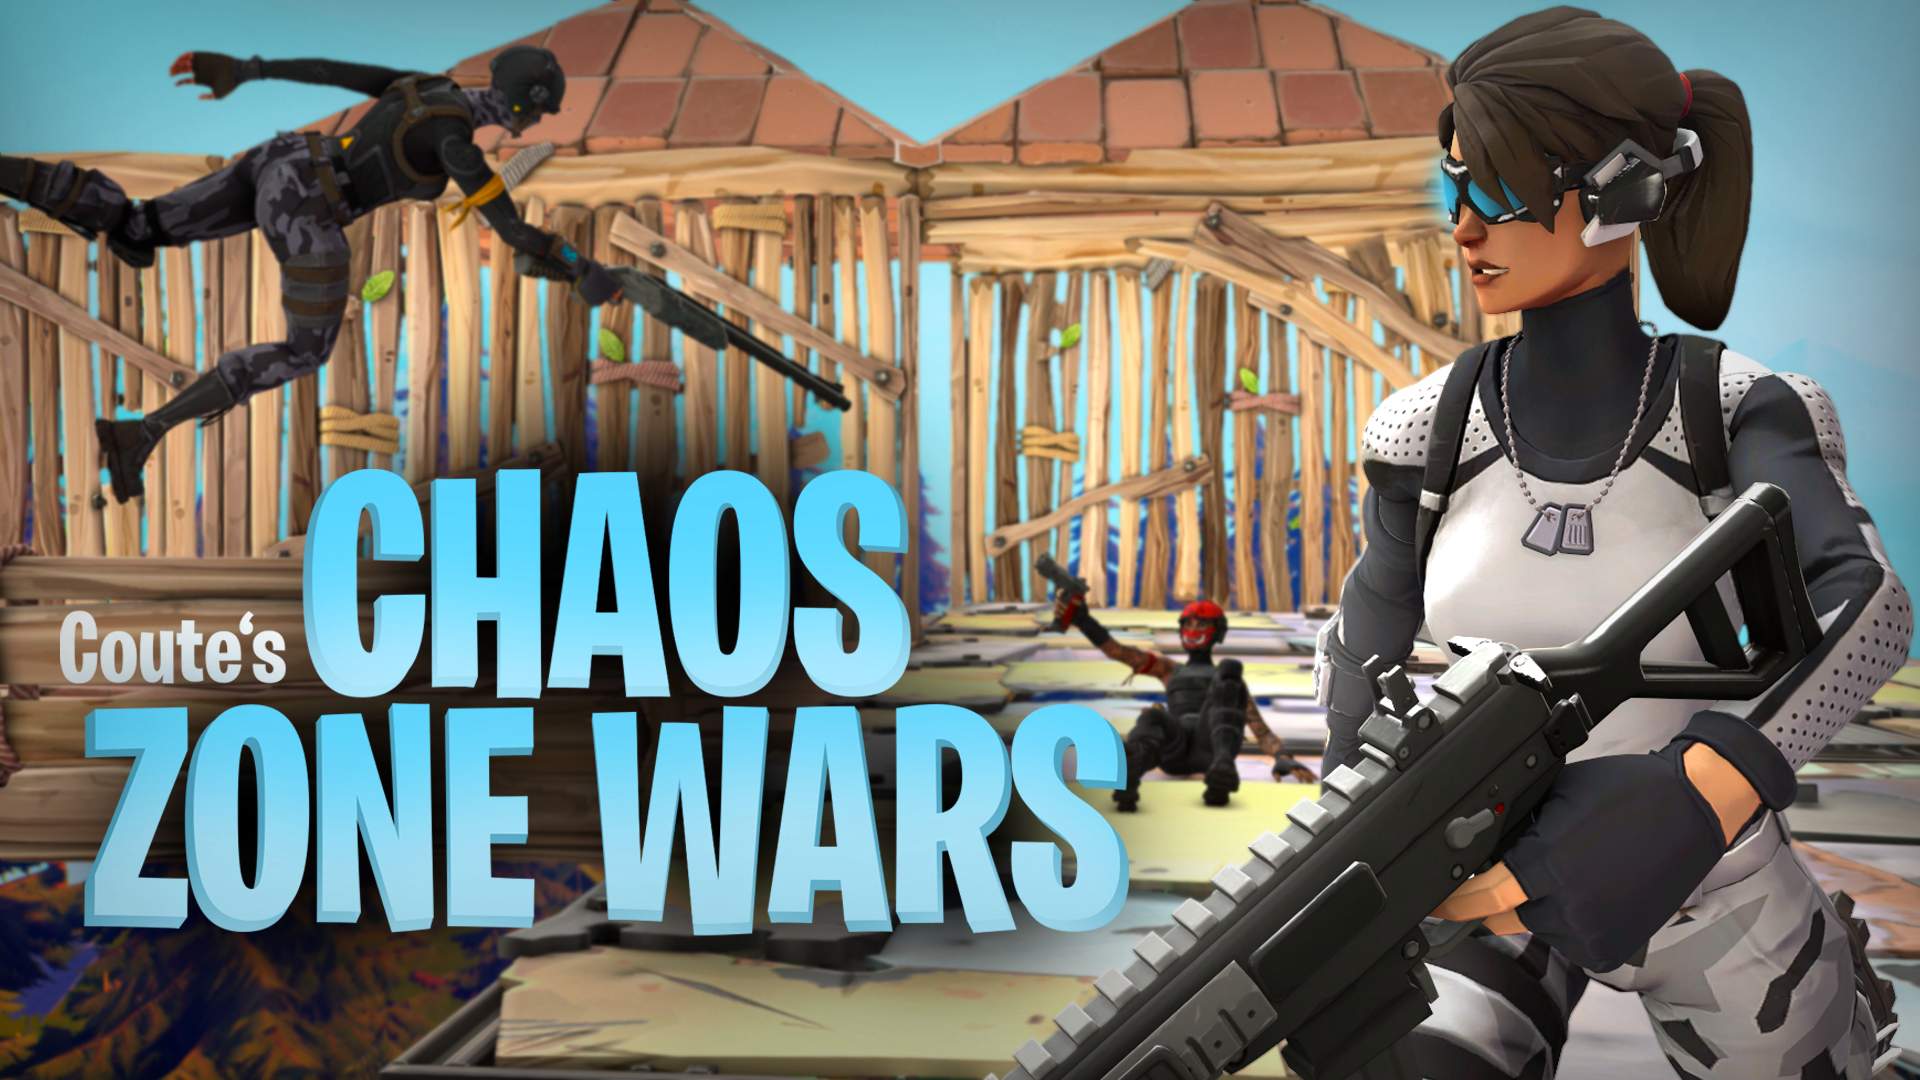 Coute's Chaos Zone Wars